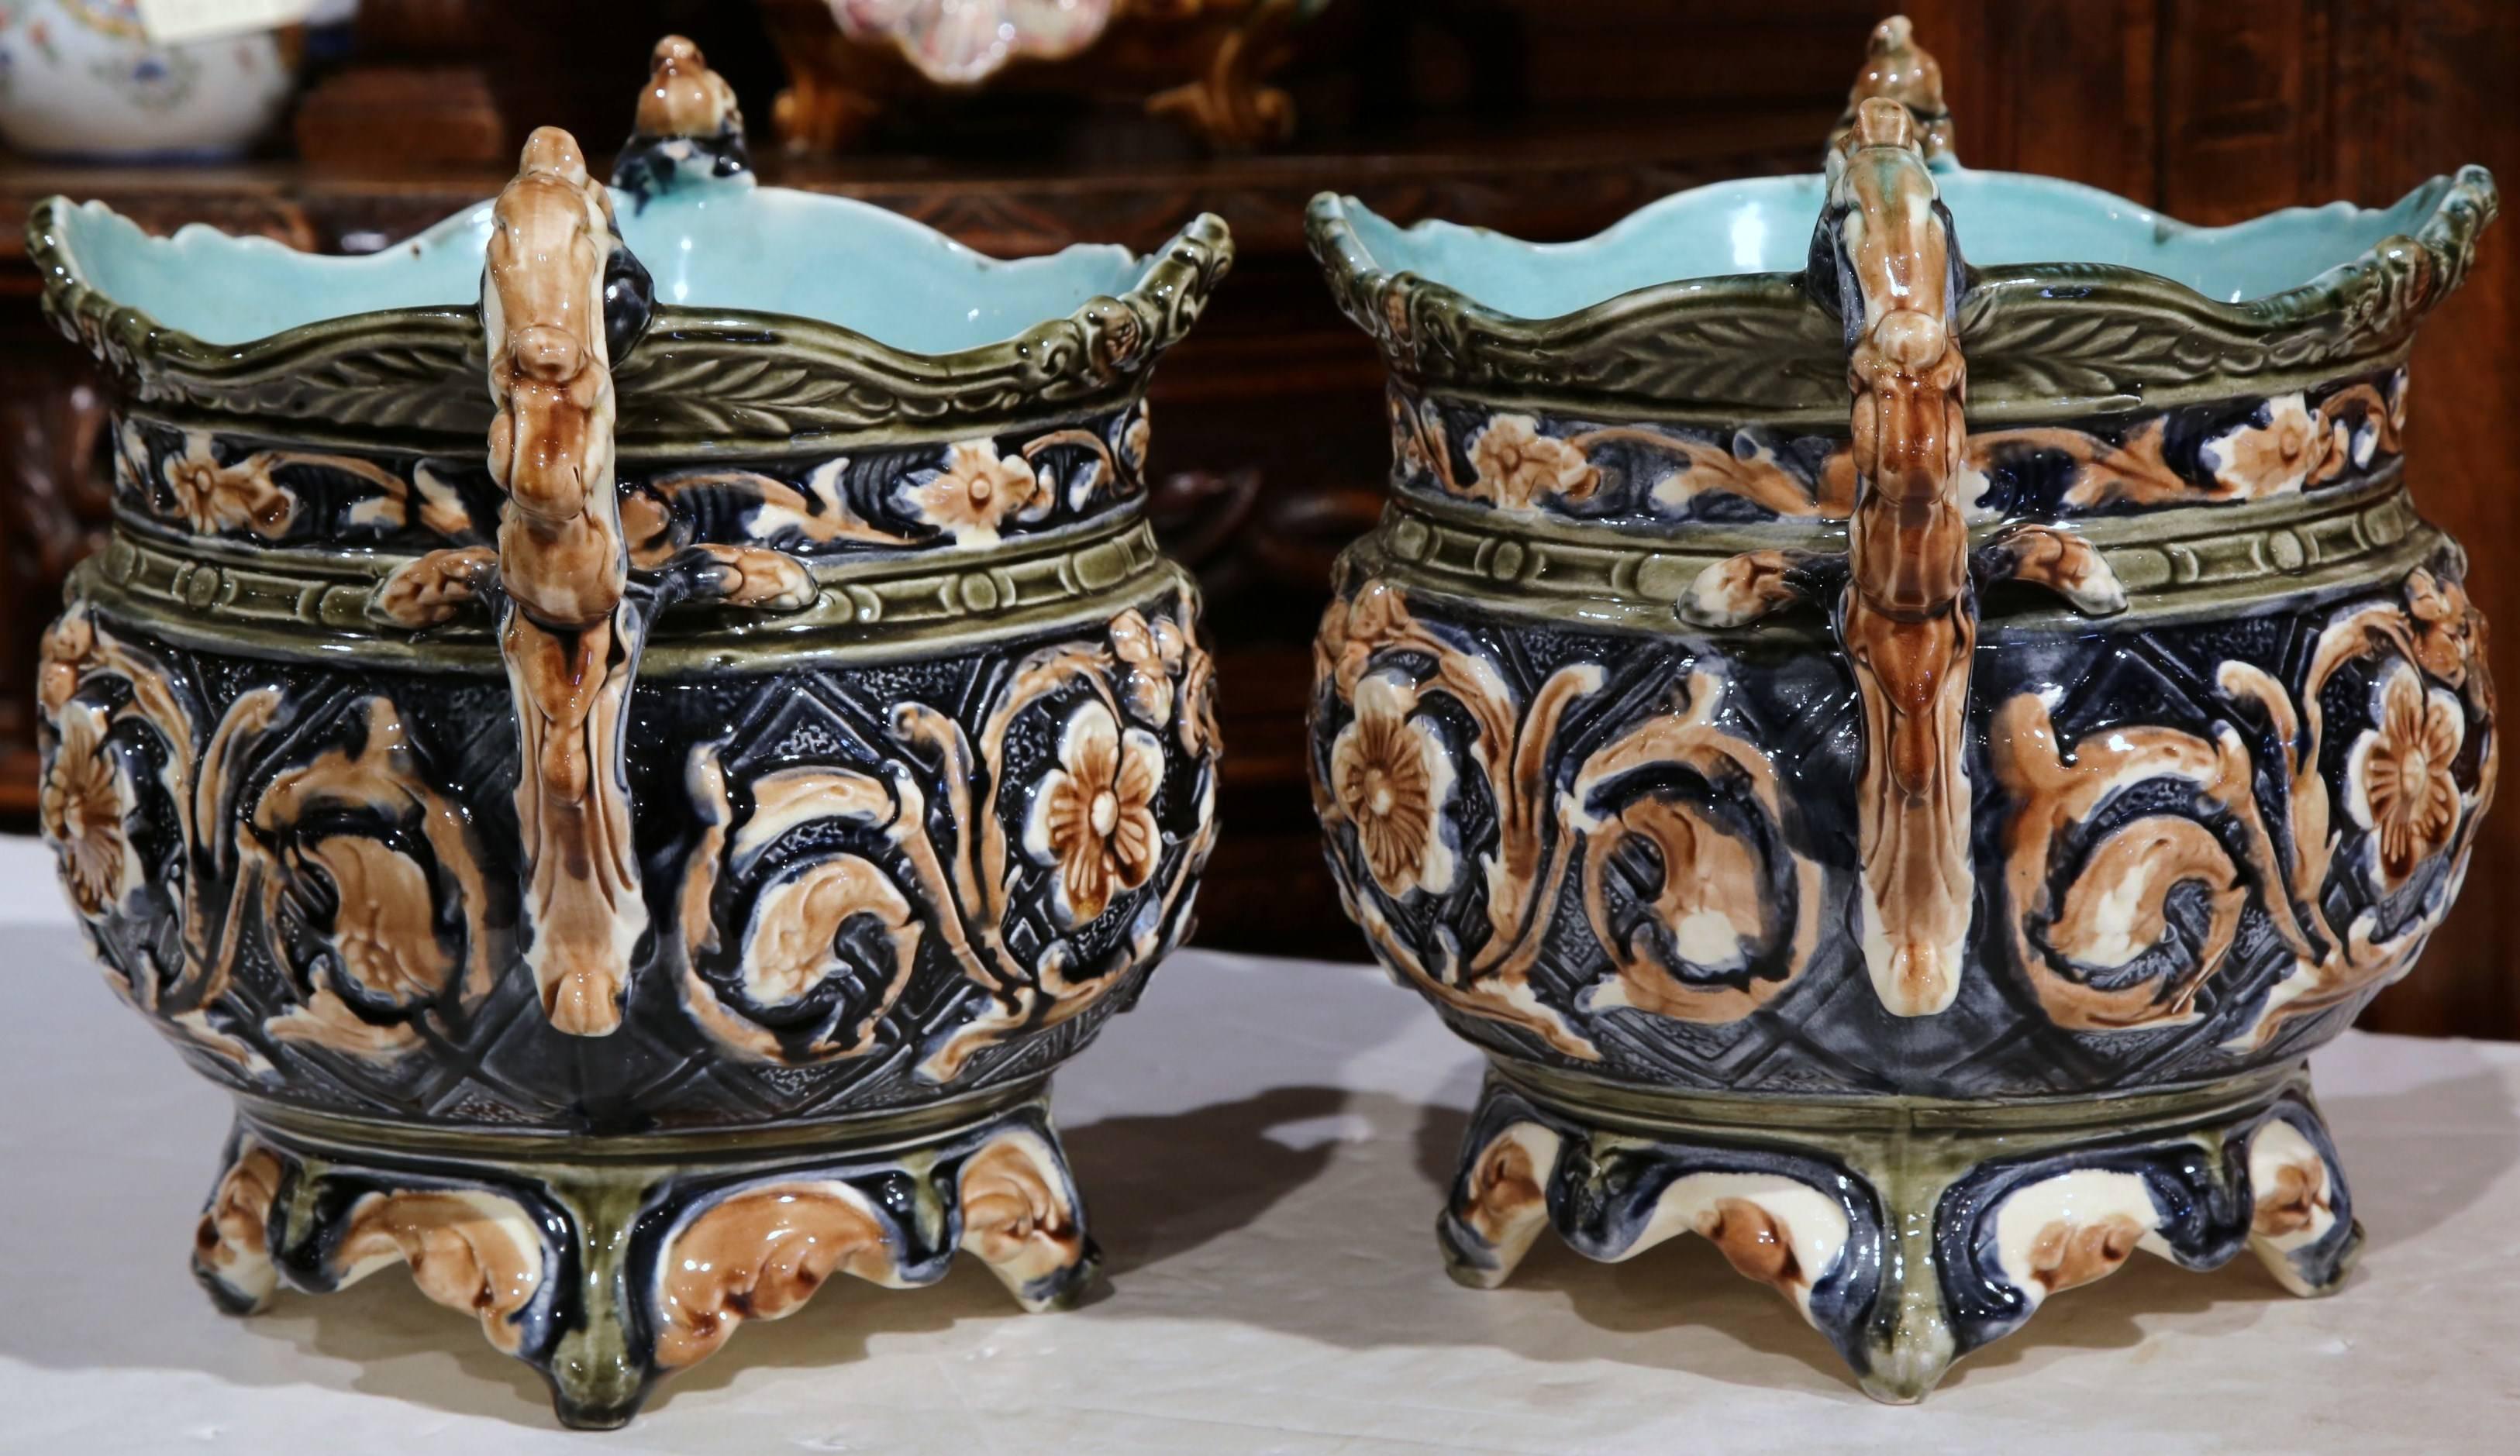 Ceramic Pair of 19th Century French Hand-Painted Barbotine Cache Pots with Flower Motifs